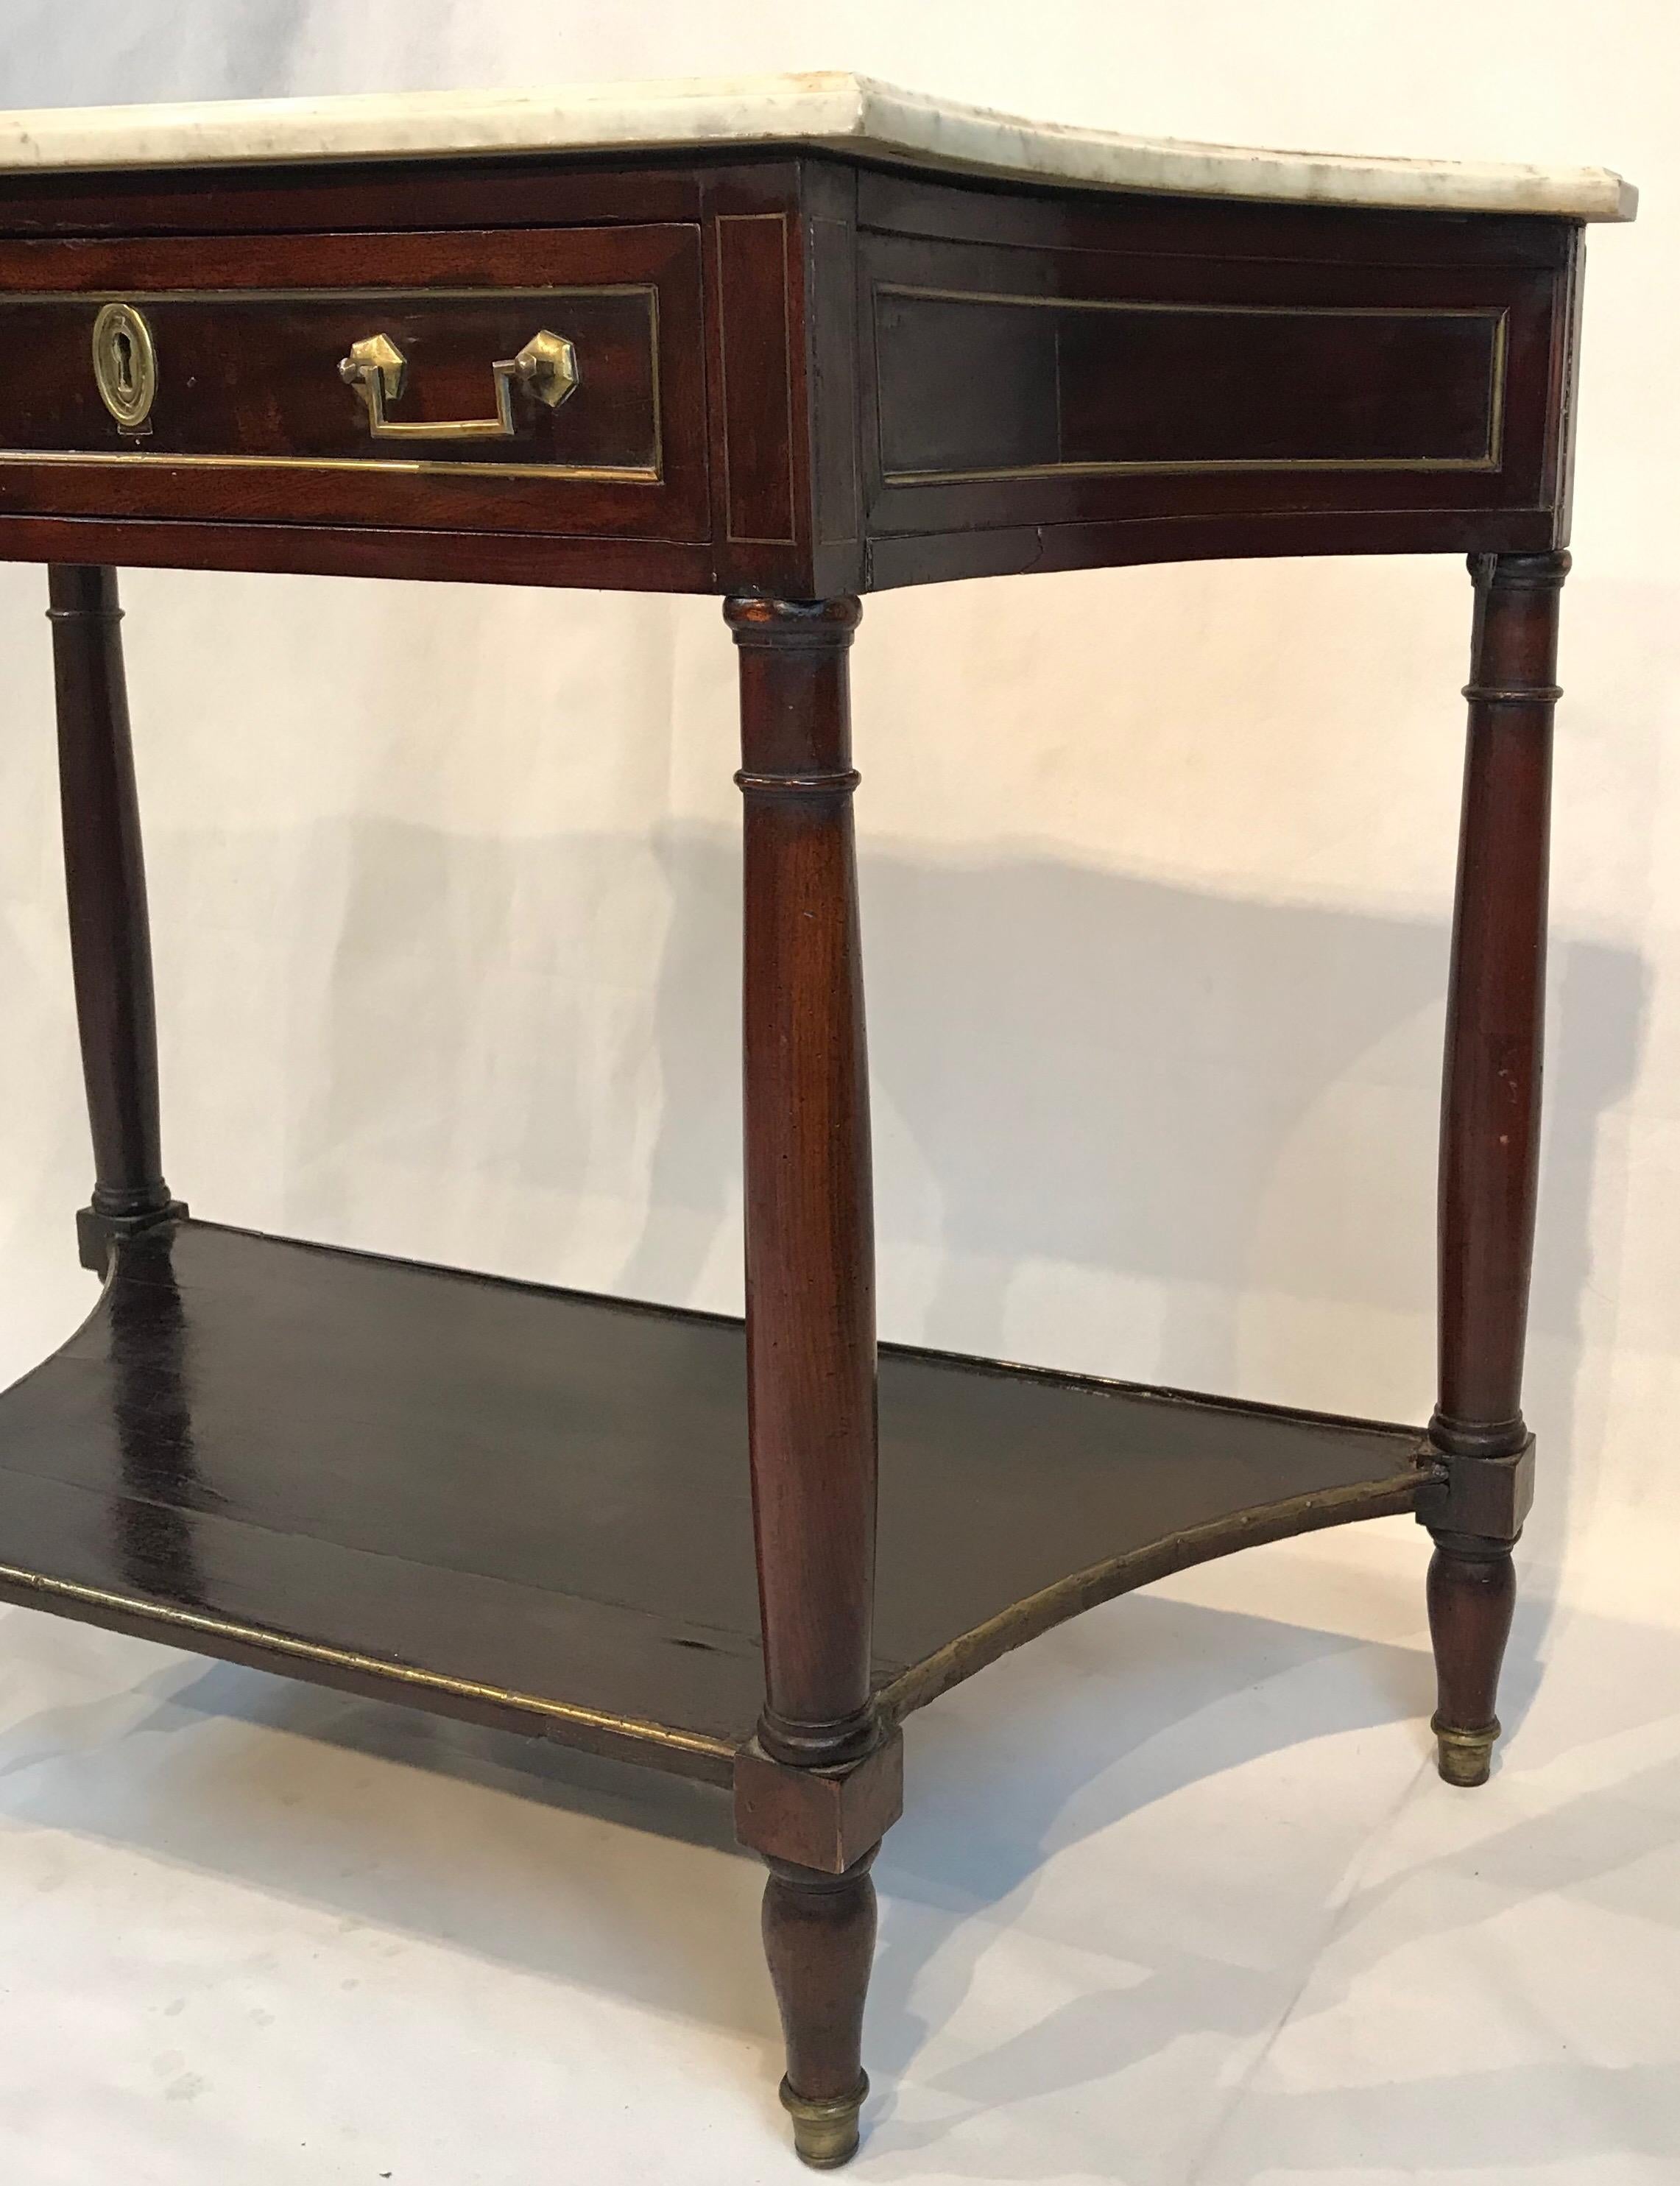 Beautiful mahogany console table having white marble top, bottom wooden shelf and single drawer. The decorative gold banding, pulls and escutcheon top off the stately piece.